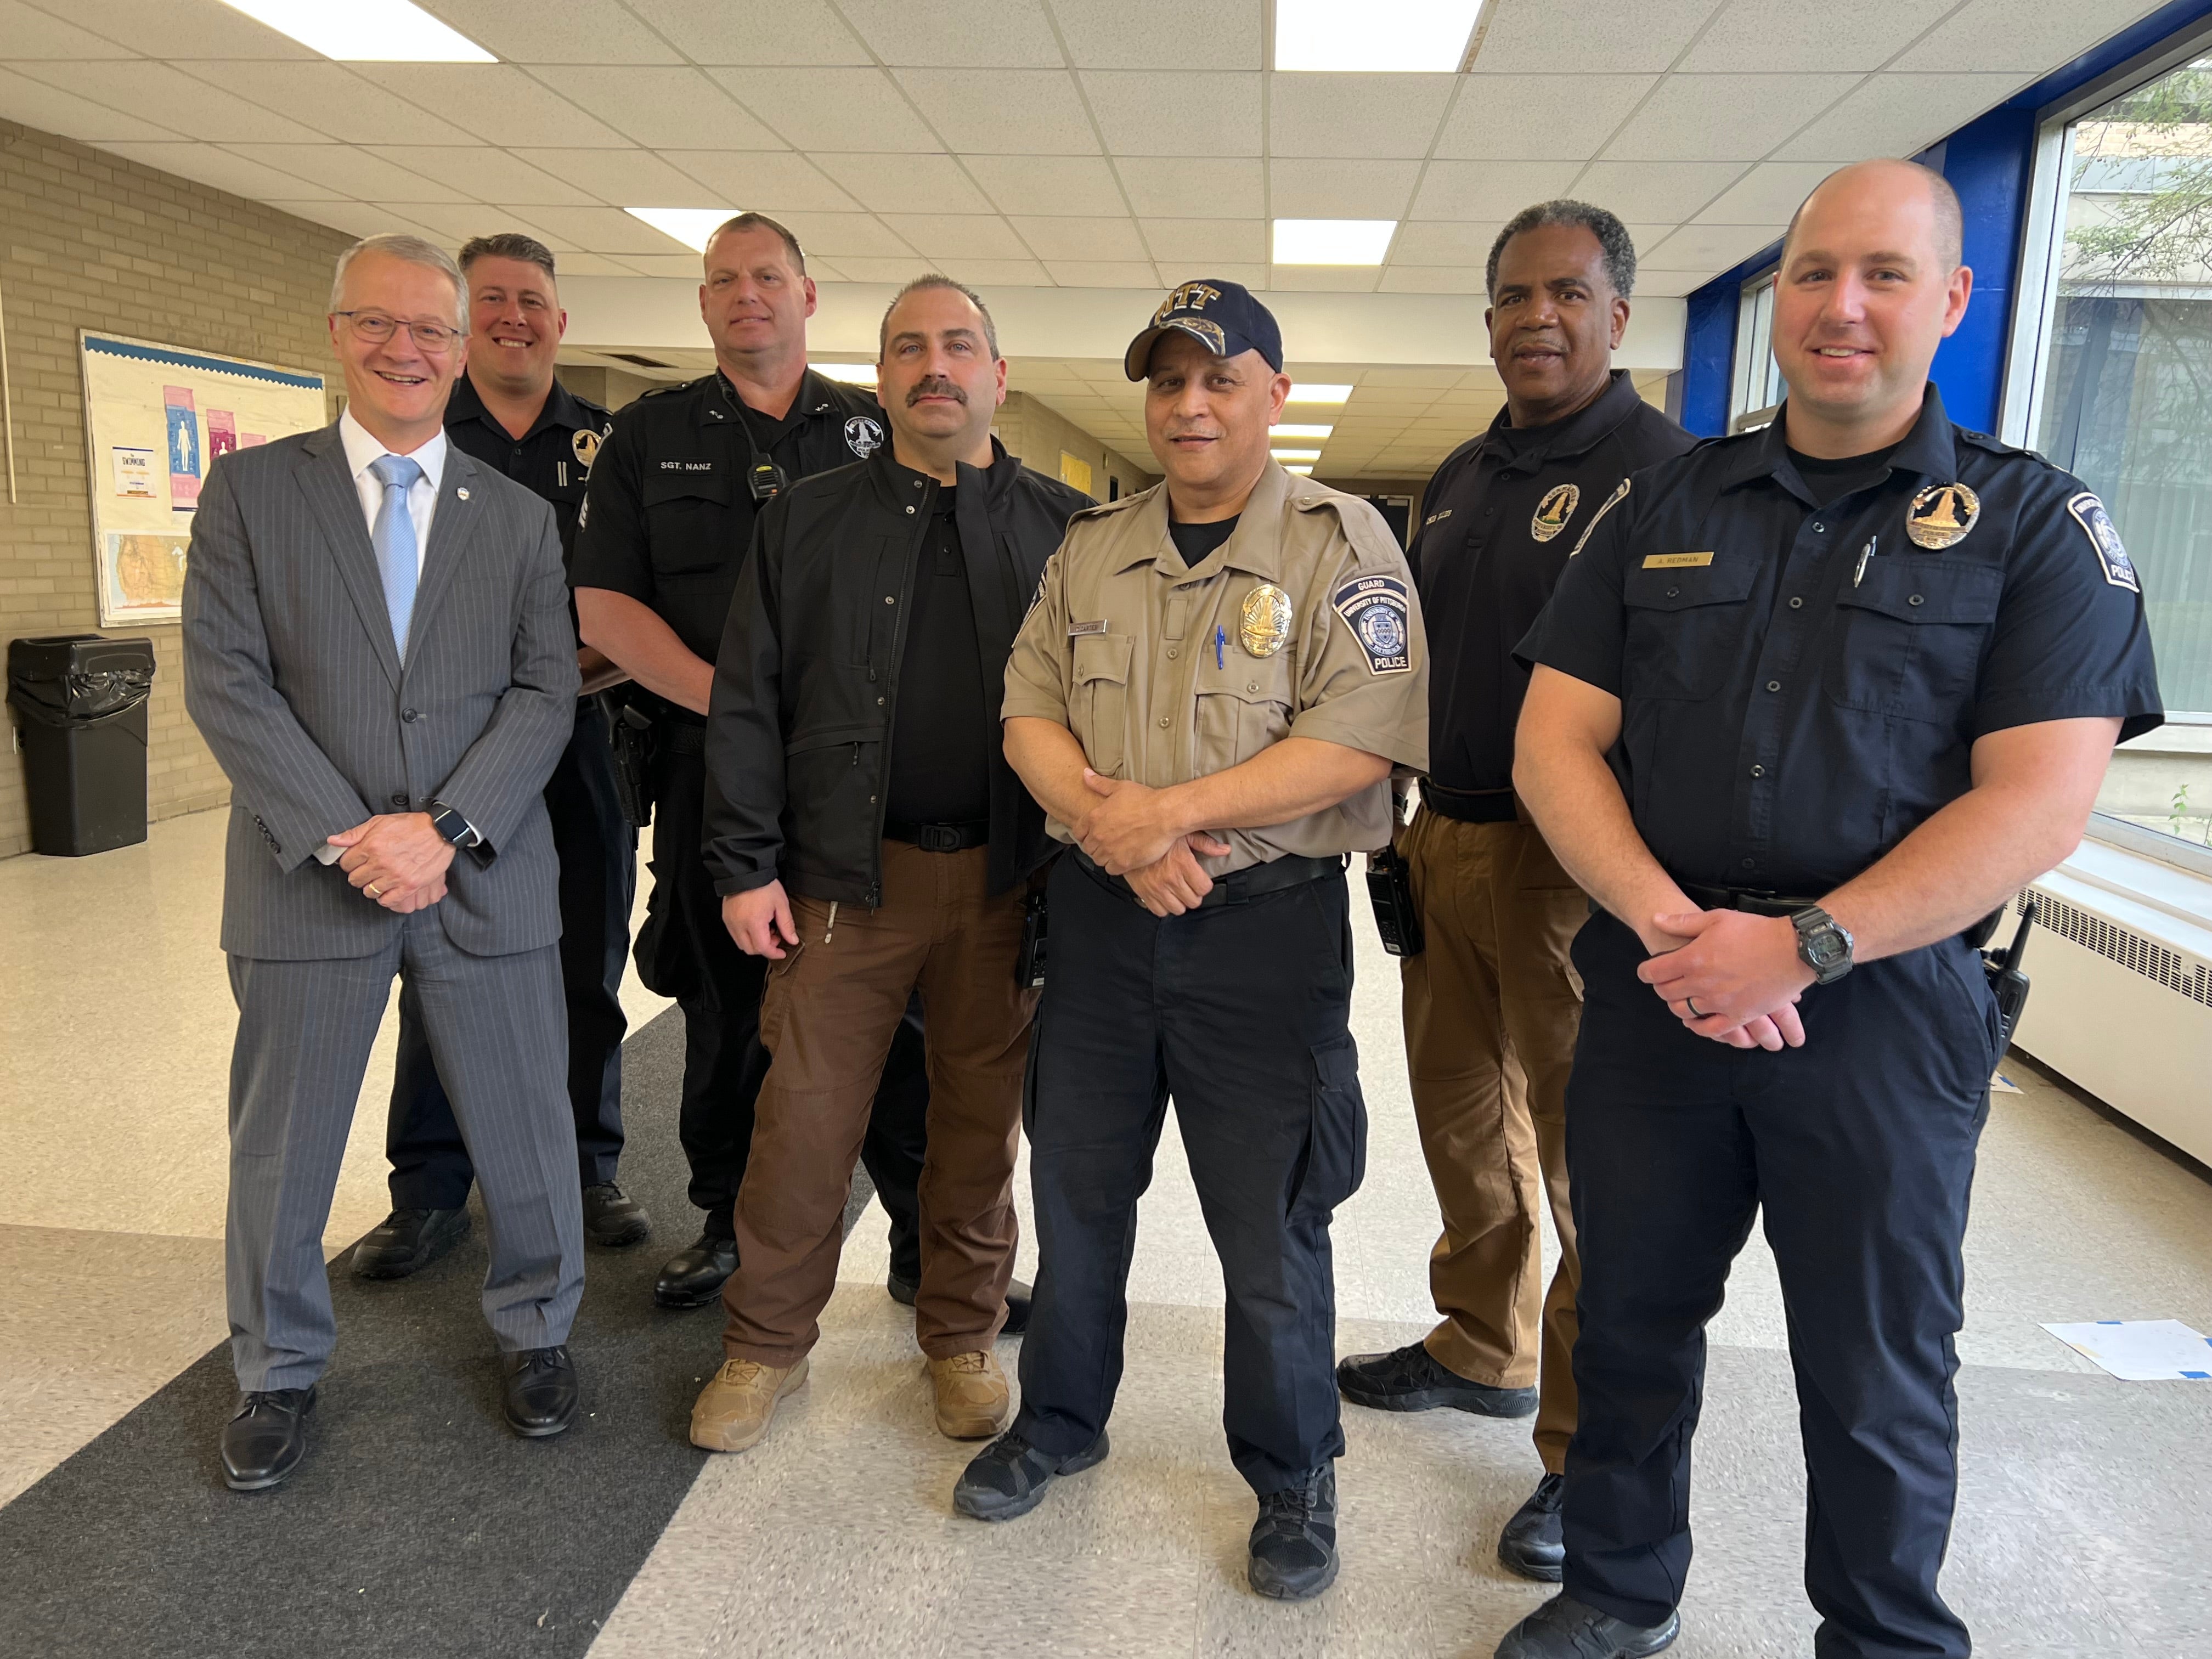 Fyi, the group photo includes, from left: David DeJong, the Senior Vice Chancellor of Business and Operations, Pitt Police Commander Robert Holler, Sgt. David Nanz, Commander David Basile, Ty Carter, Commander Shawn Ellies and Commander Andrew Redman.